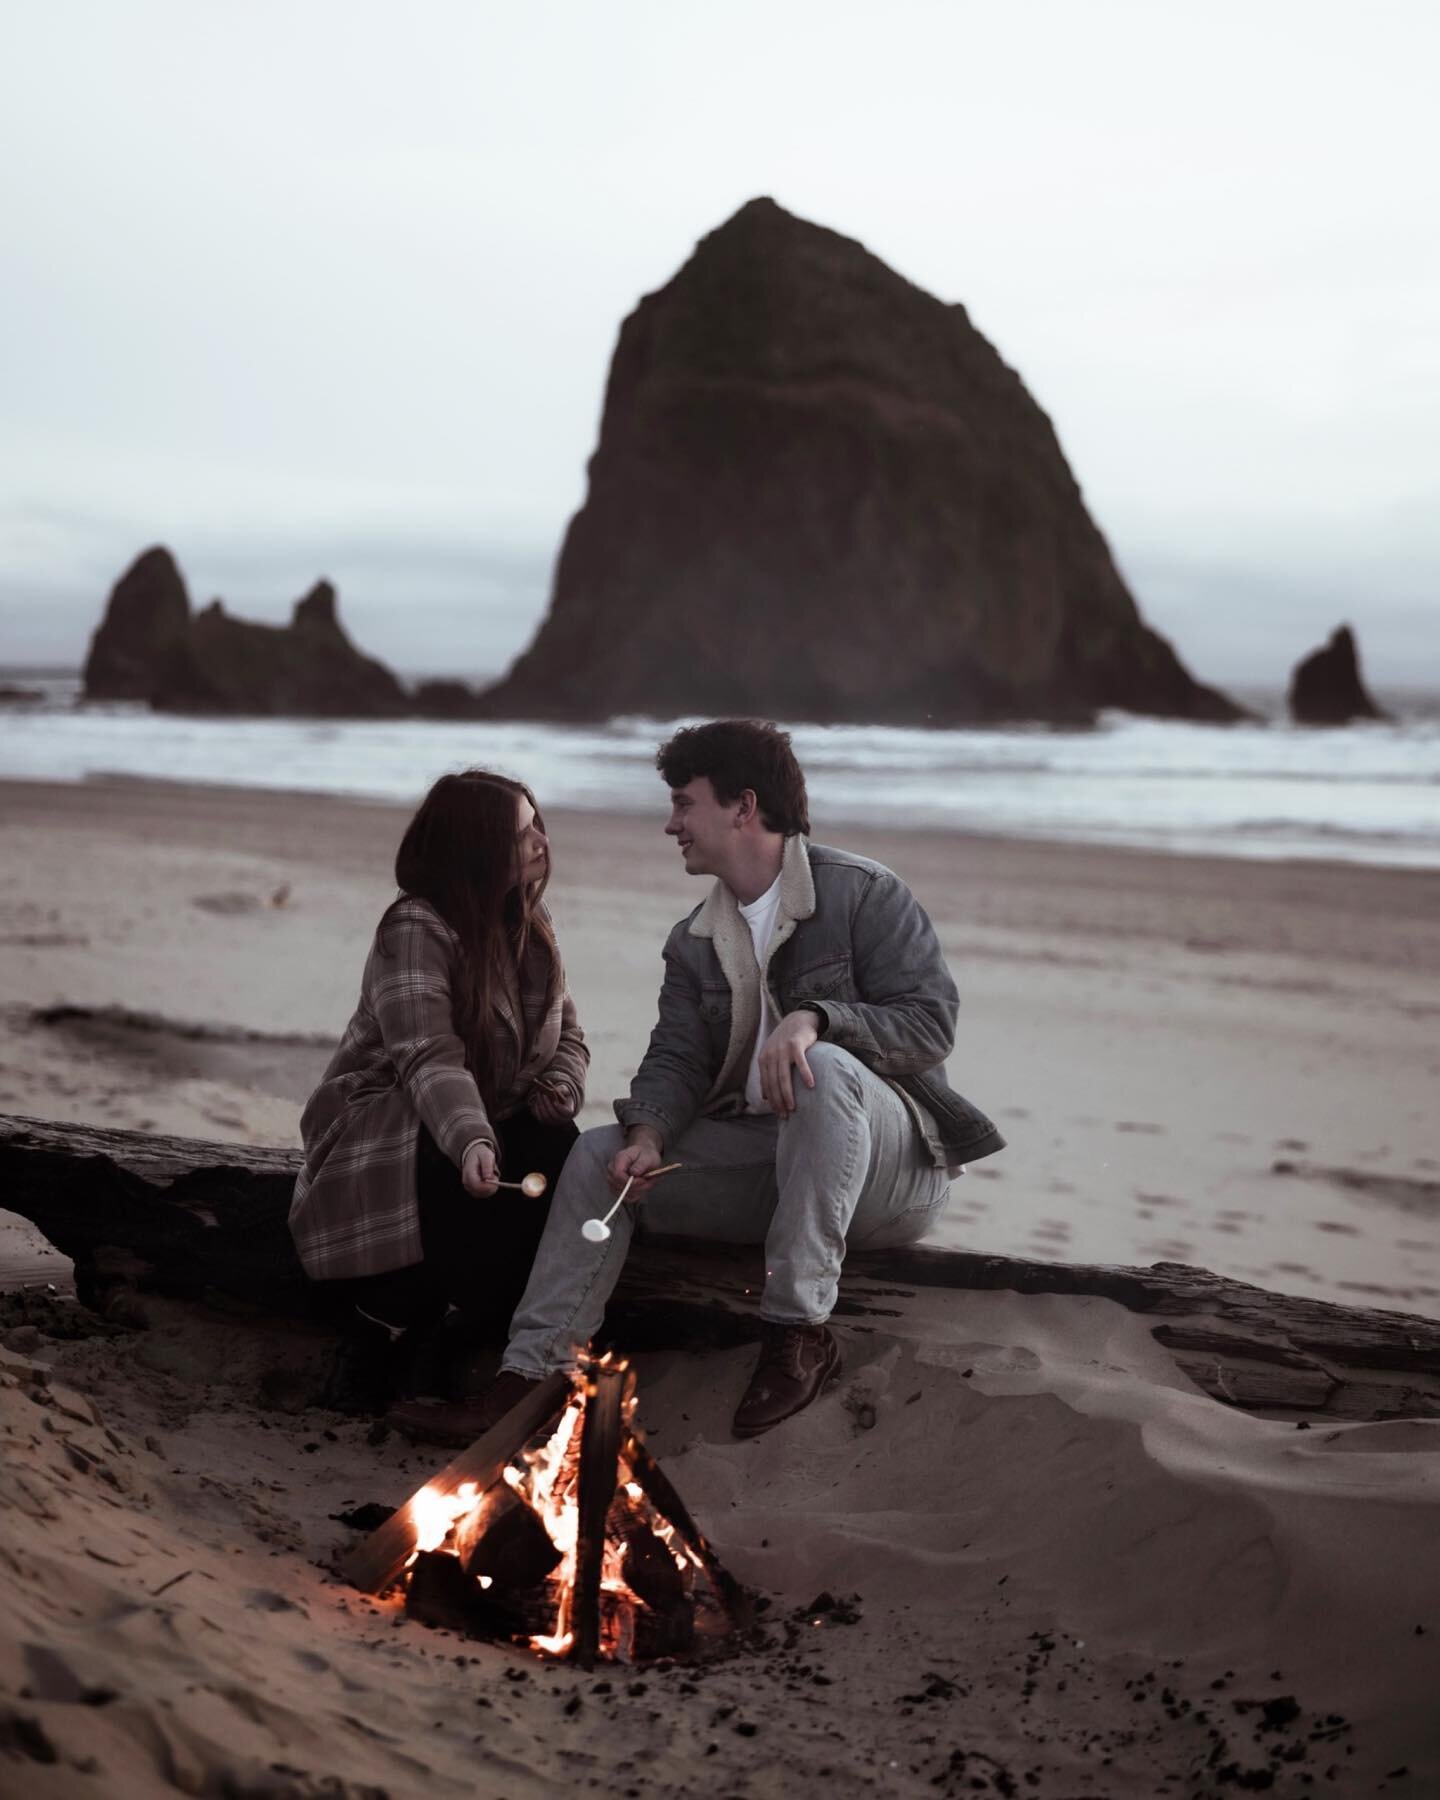 took a trip to Oregon so of course we had to take some pictures 🌲🦉🌊 we fell in love with the PNW and are dying to go back so if anyone wants to do an elopement or vow renewal please let us know✨